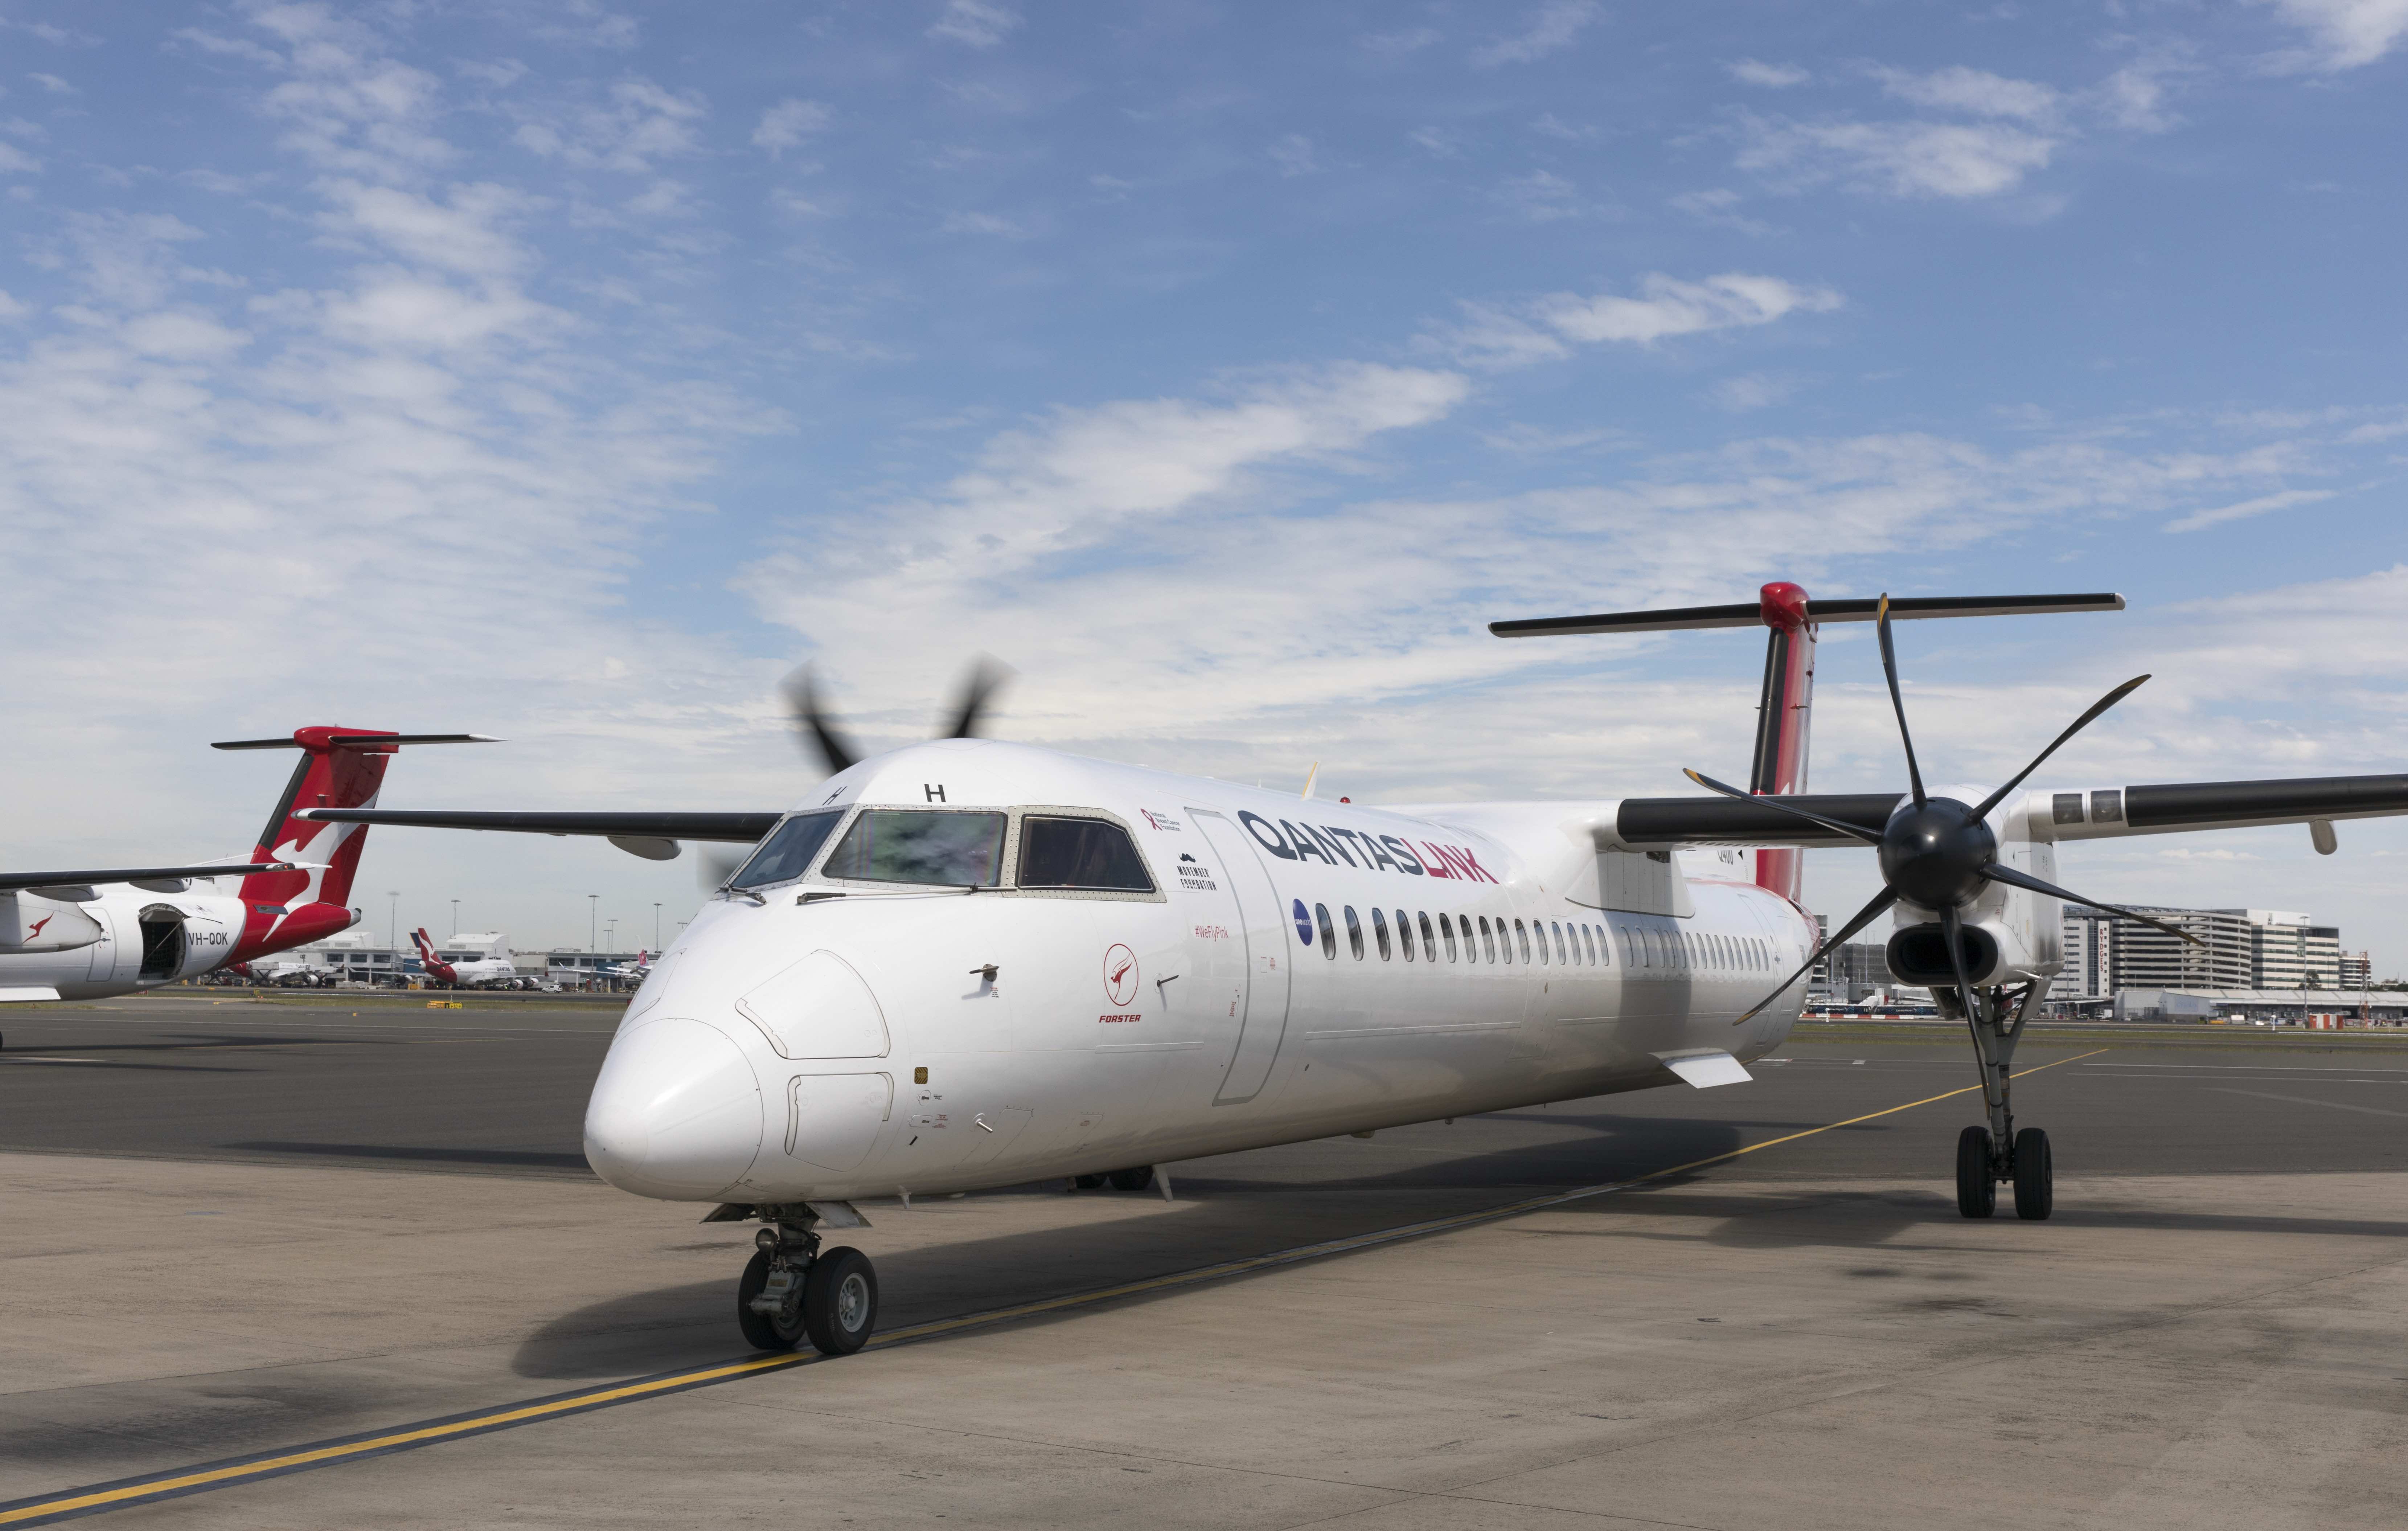 Fly to the Snowy Mountains Airport from Brisbane and Sydney this Winter with Qantas